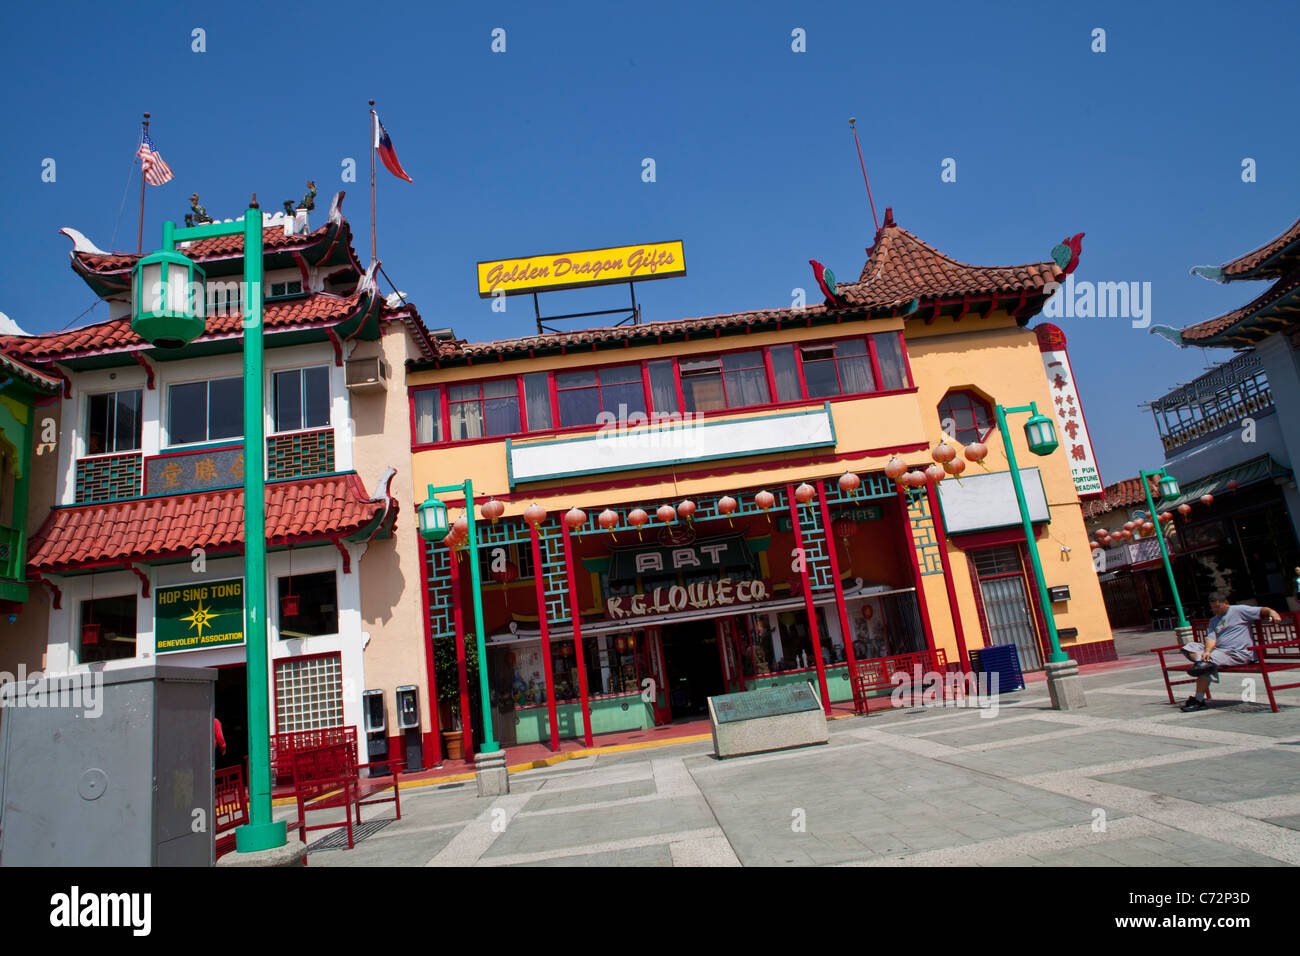 Scenes from Chinatown in Los Angeles Stock Photo